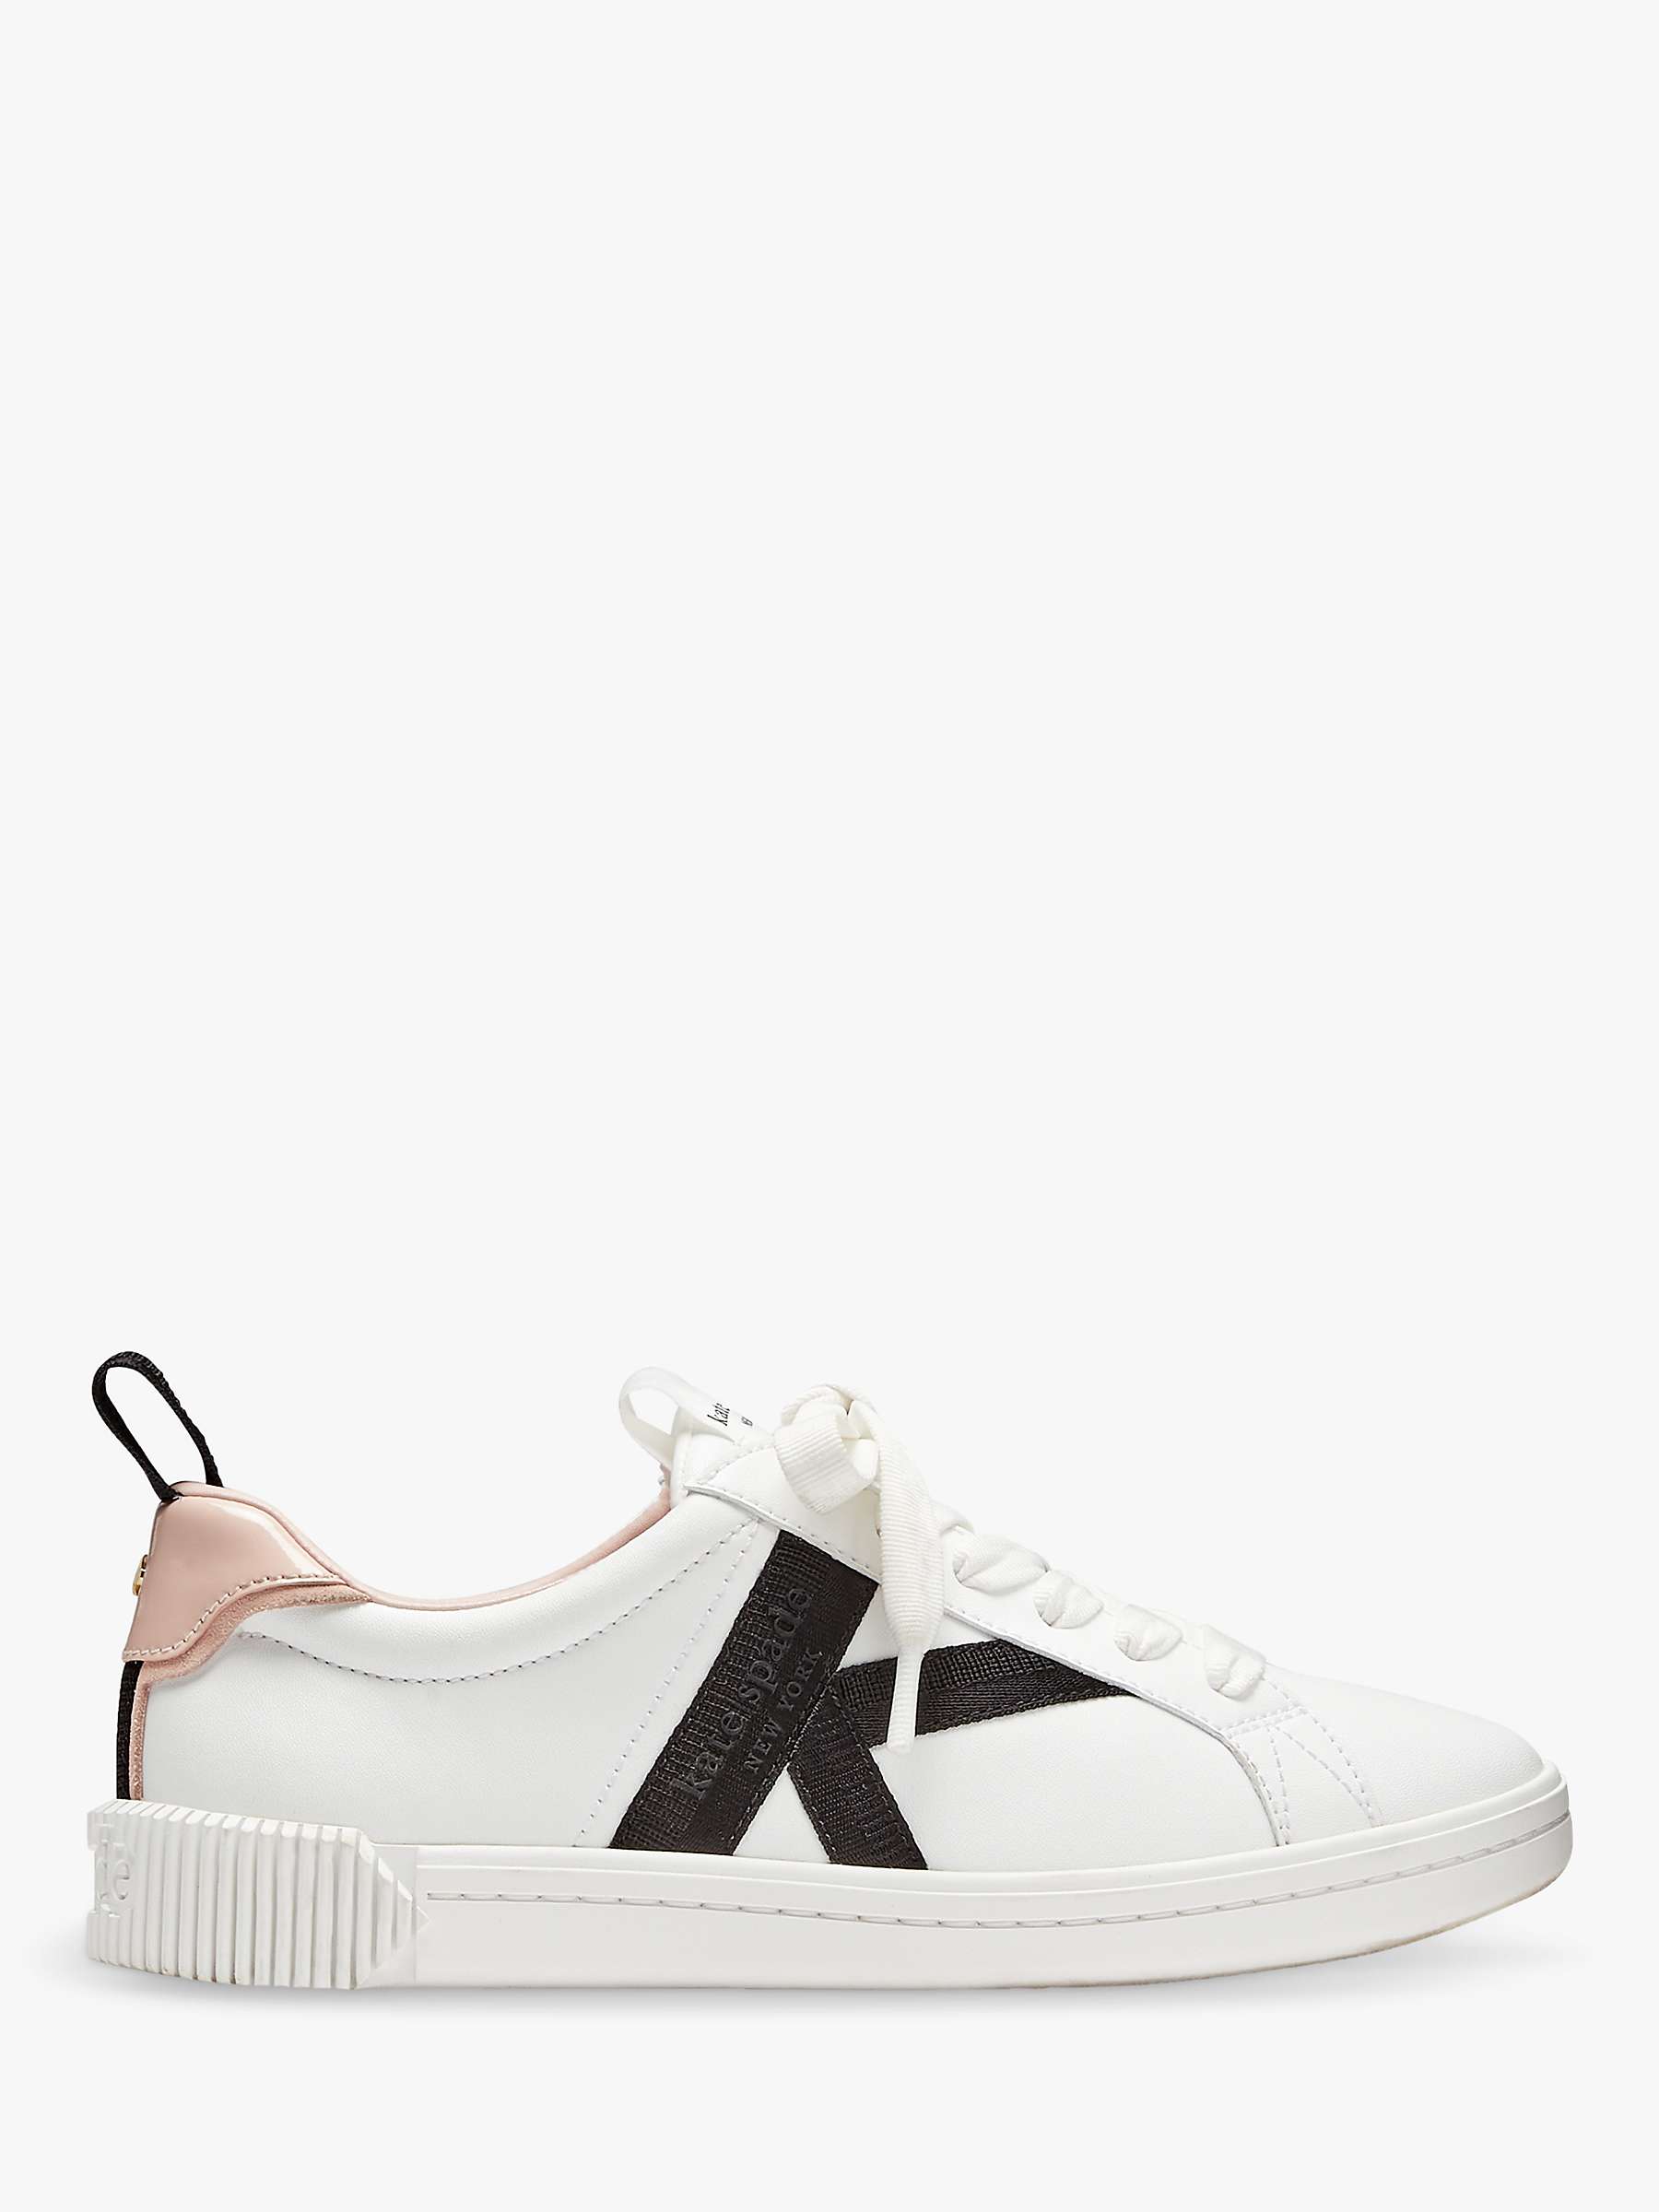 Buy kate spade new york Signature Trainers, White/Pink/Black Online at johnlewis.com